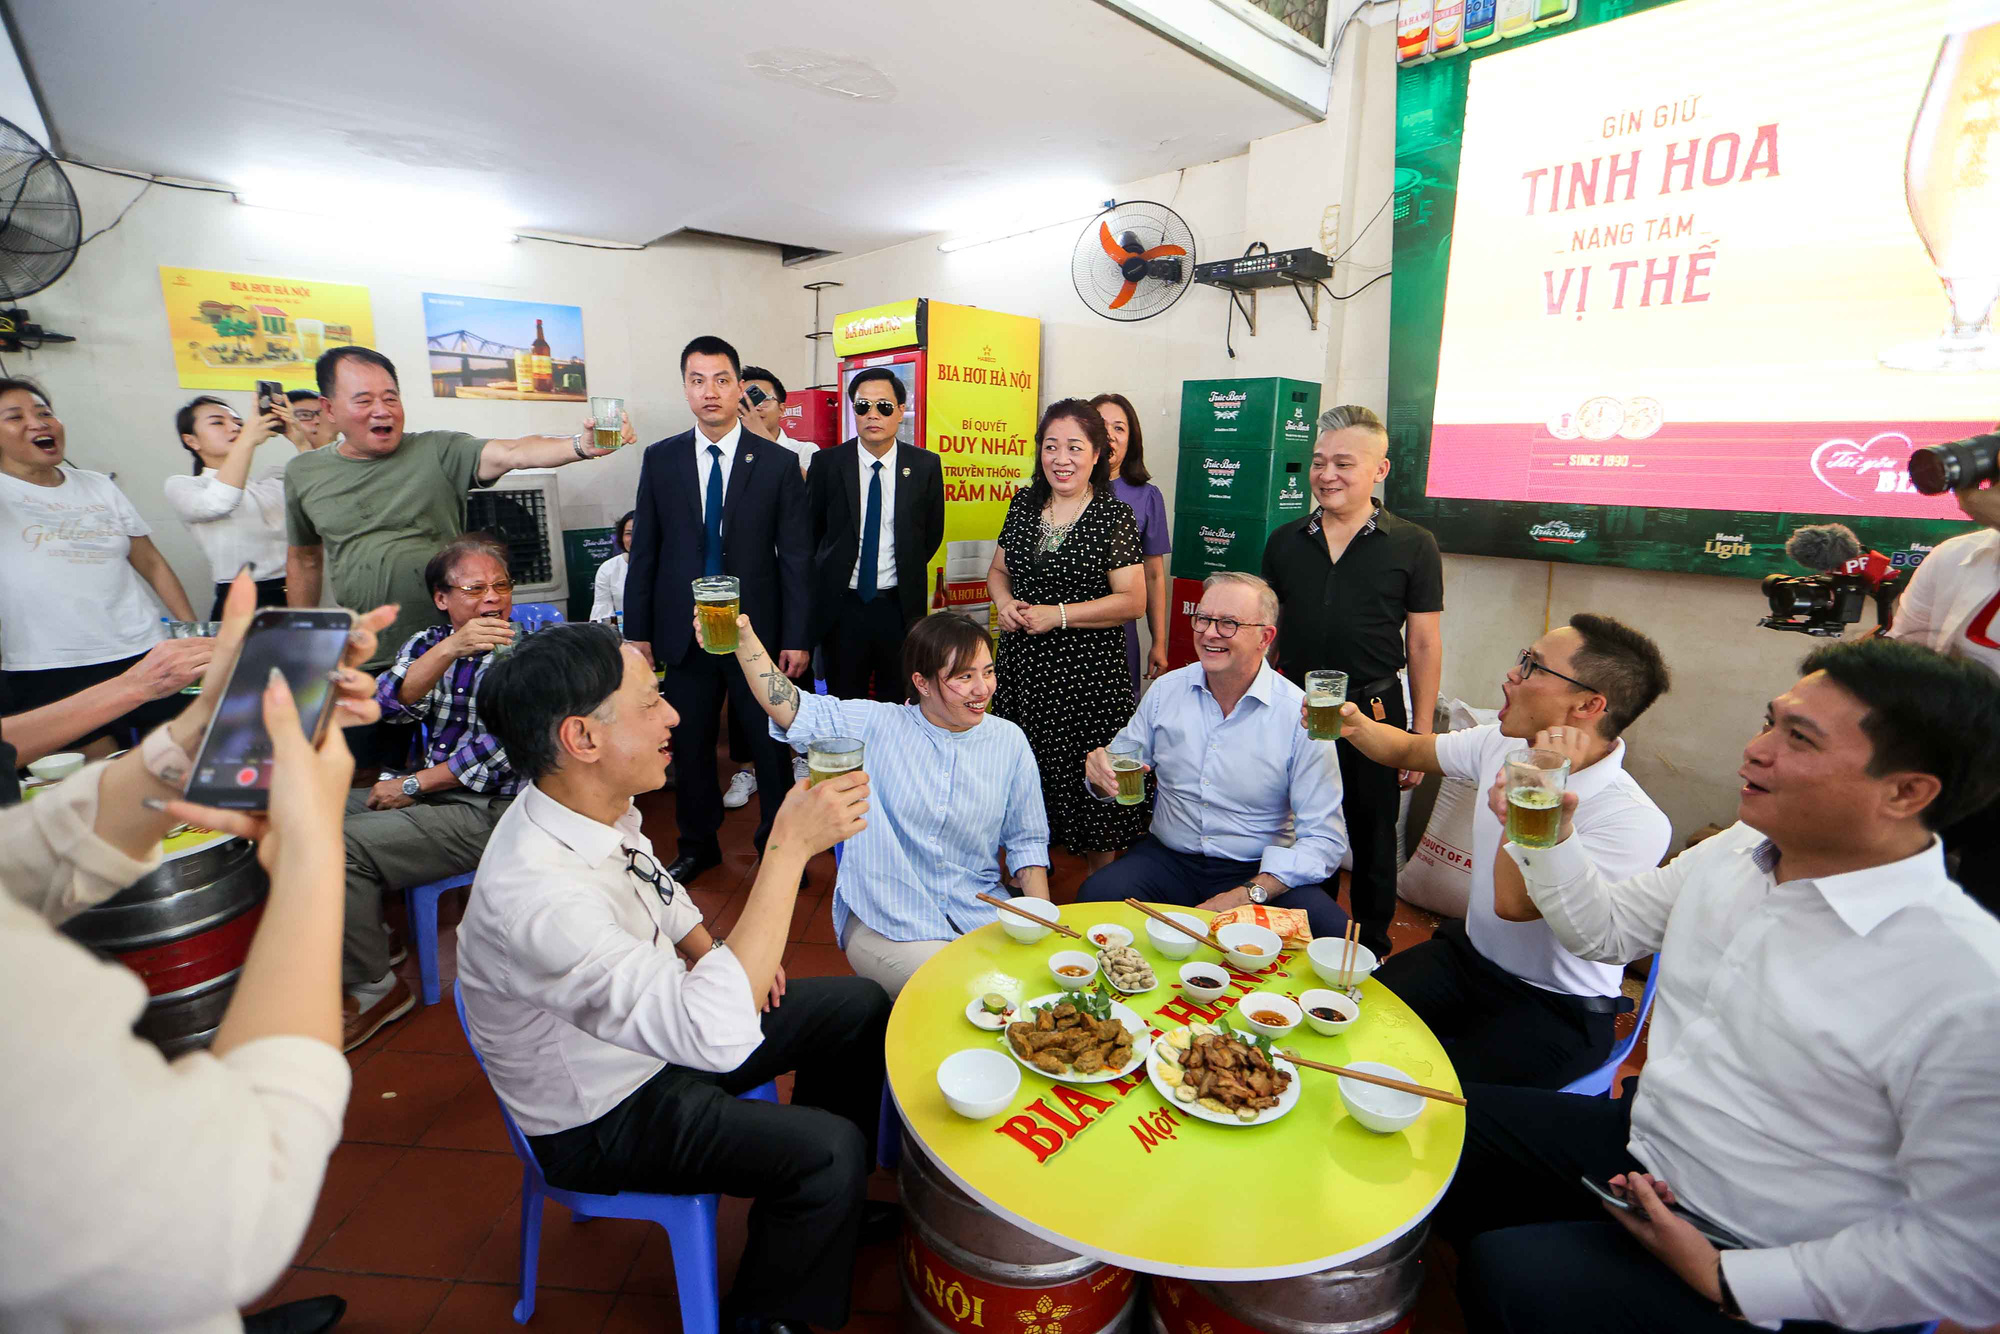 PM Albanese jointly says “Mot, hai, ba, Do!” (one, two, three, Cheers!) and chats with people drinking beer in the shop